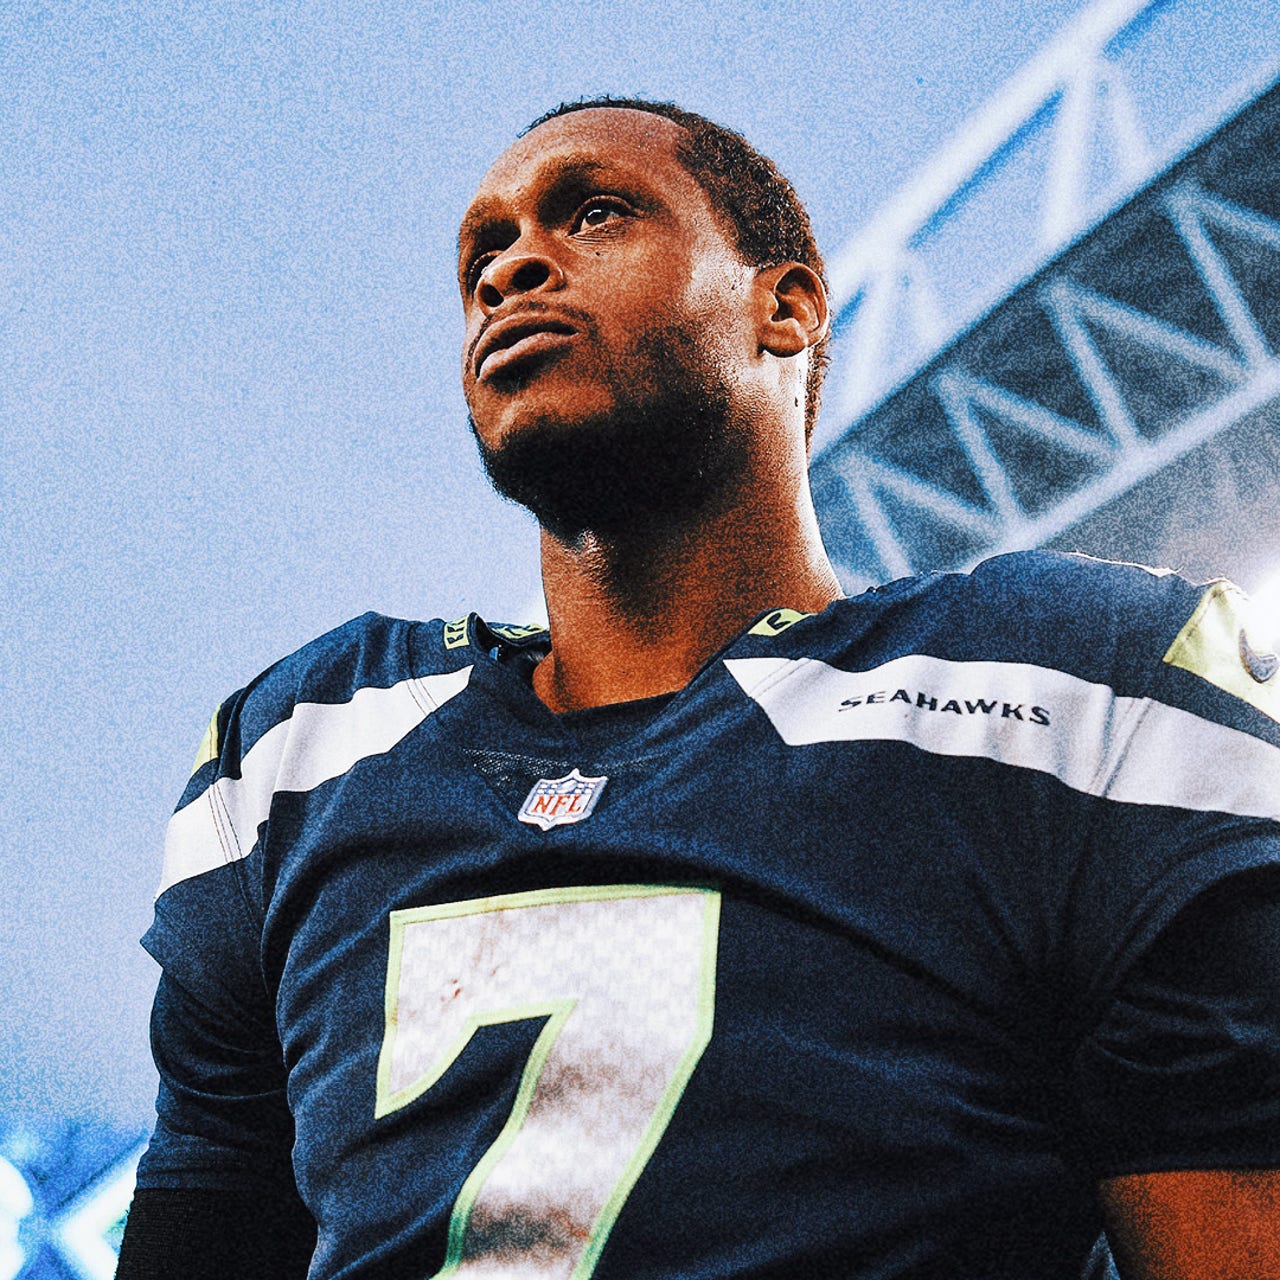 Seattle Seahawks want Geno Smith back under center in 2023, per